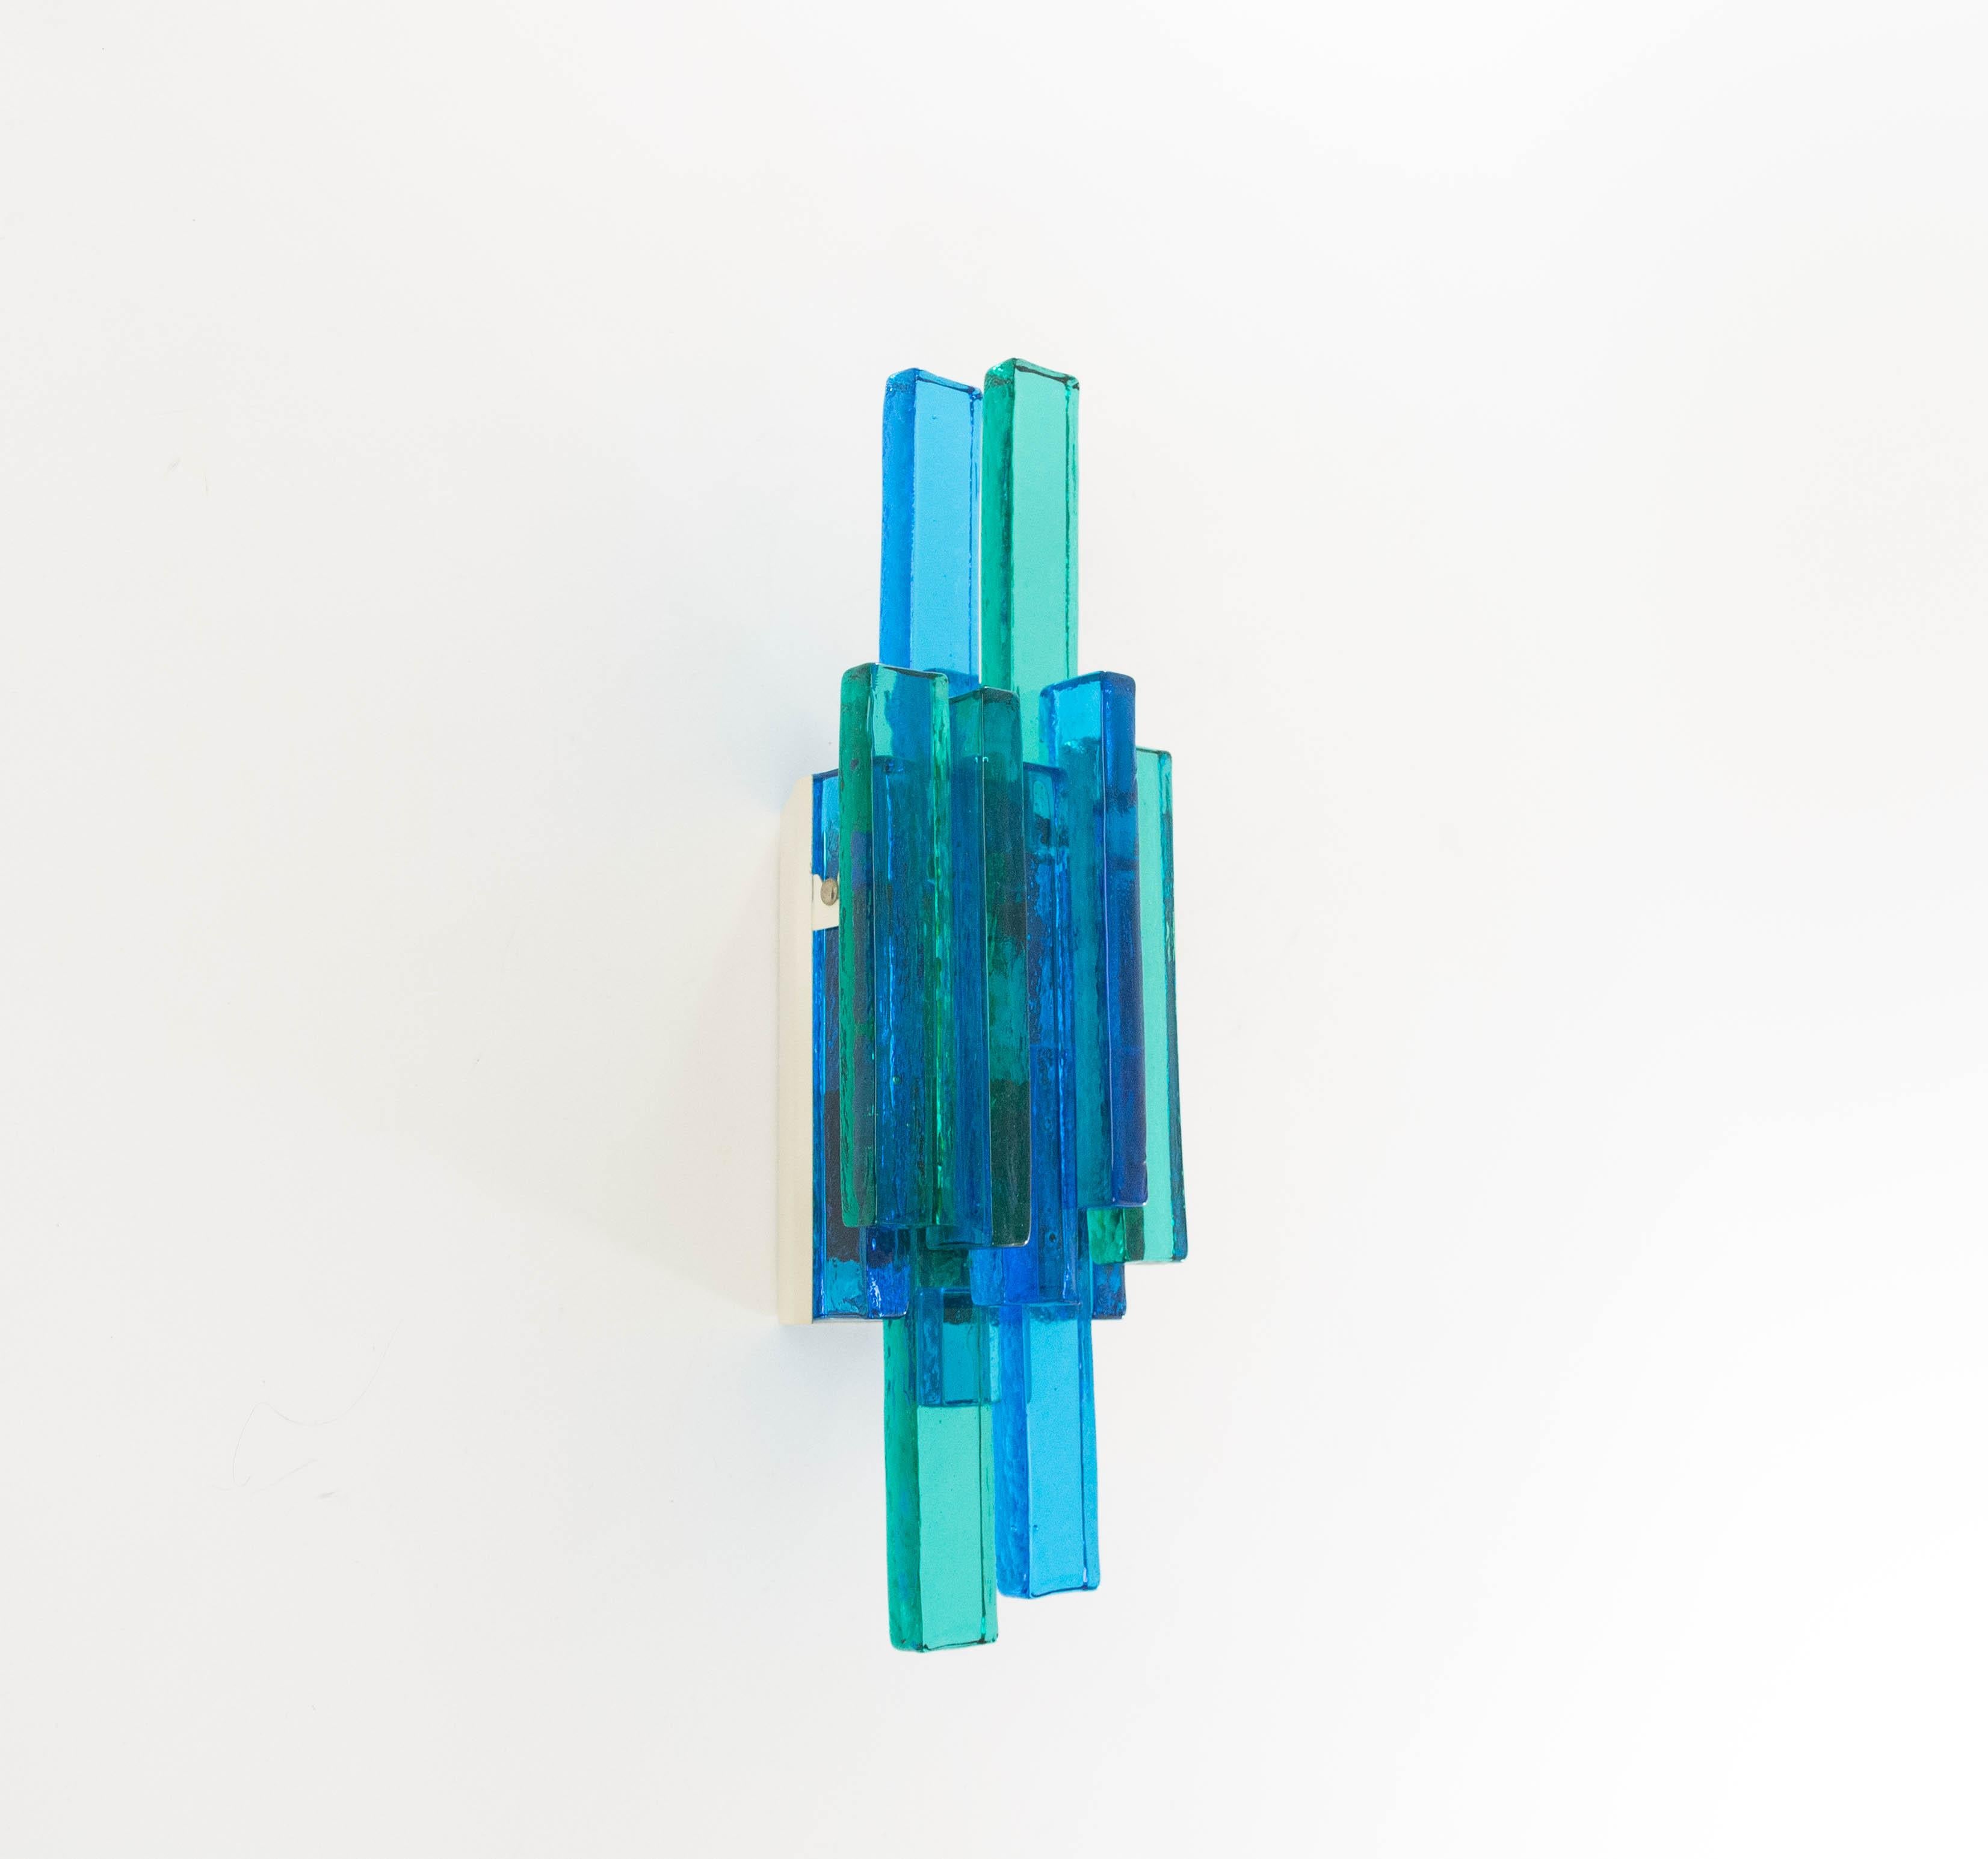 Blue glass Skulptur lampet wall lamp designed by Svend Aage Holm Sørensen for his own company, Holm Sørensen & Co. Beautifully designed with marine and dark blue colored glass, granting the lamp a striking appearance.

The lamp consists of a glass